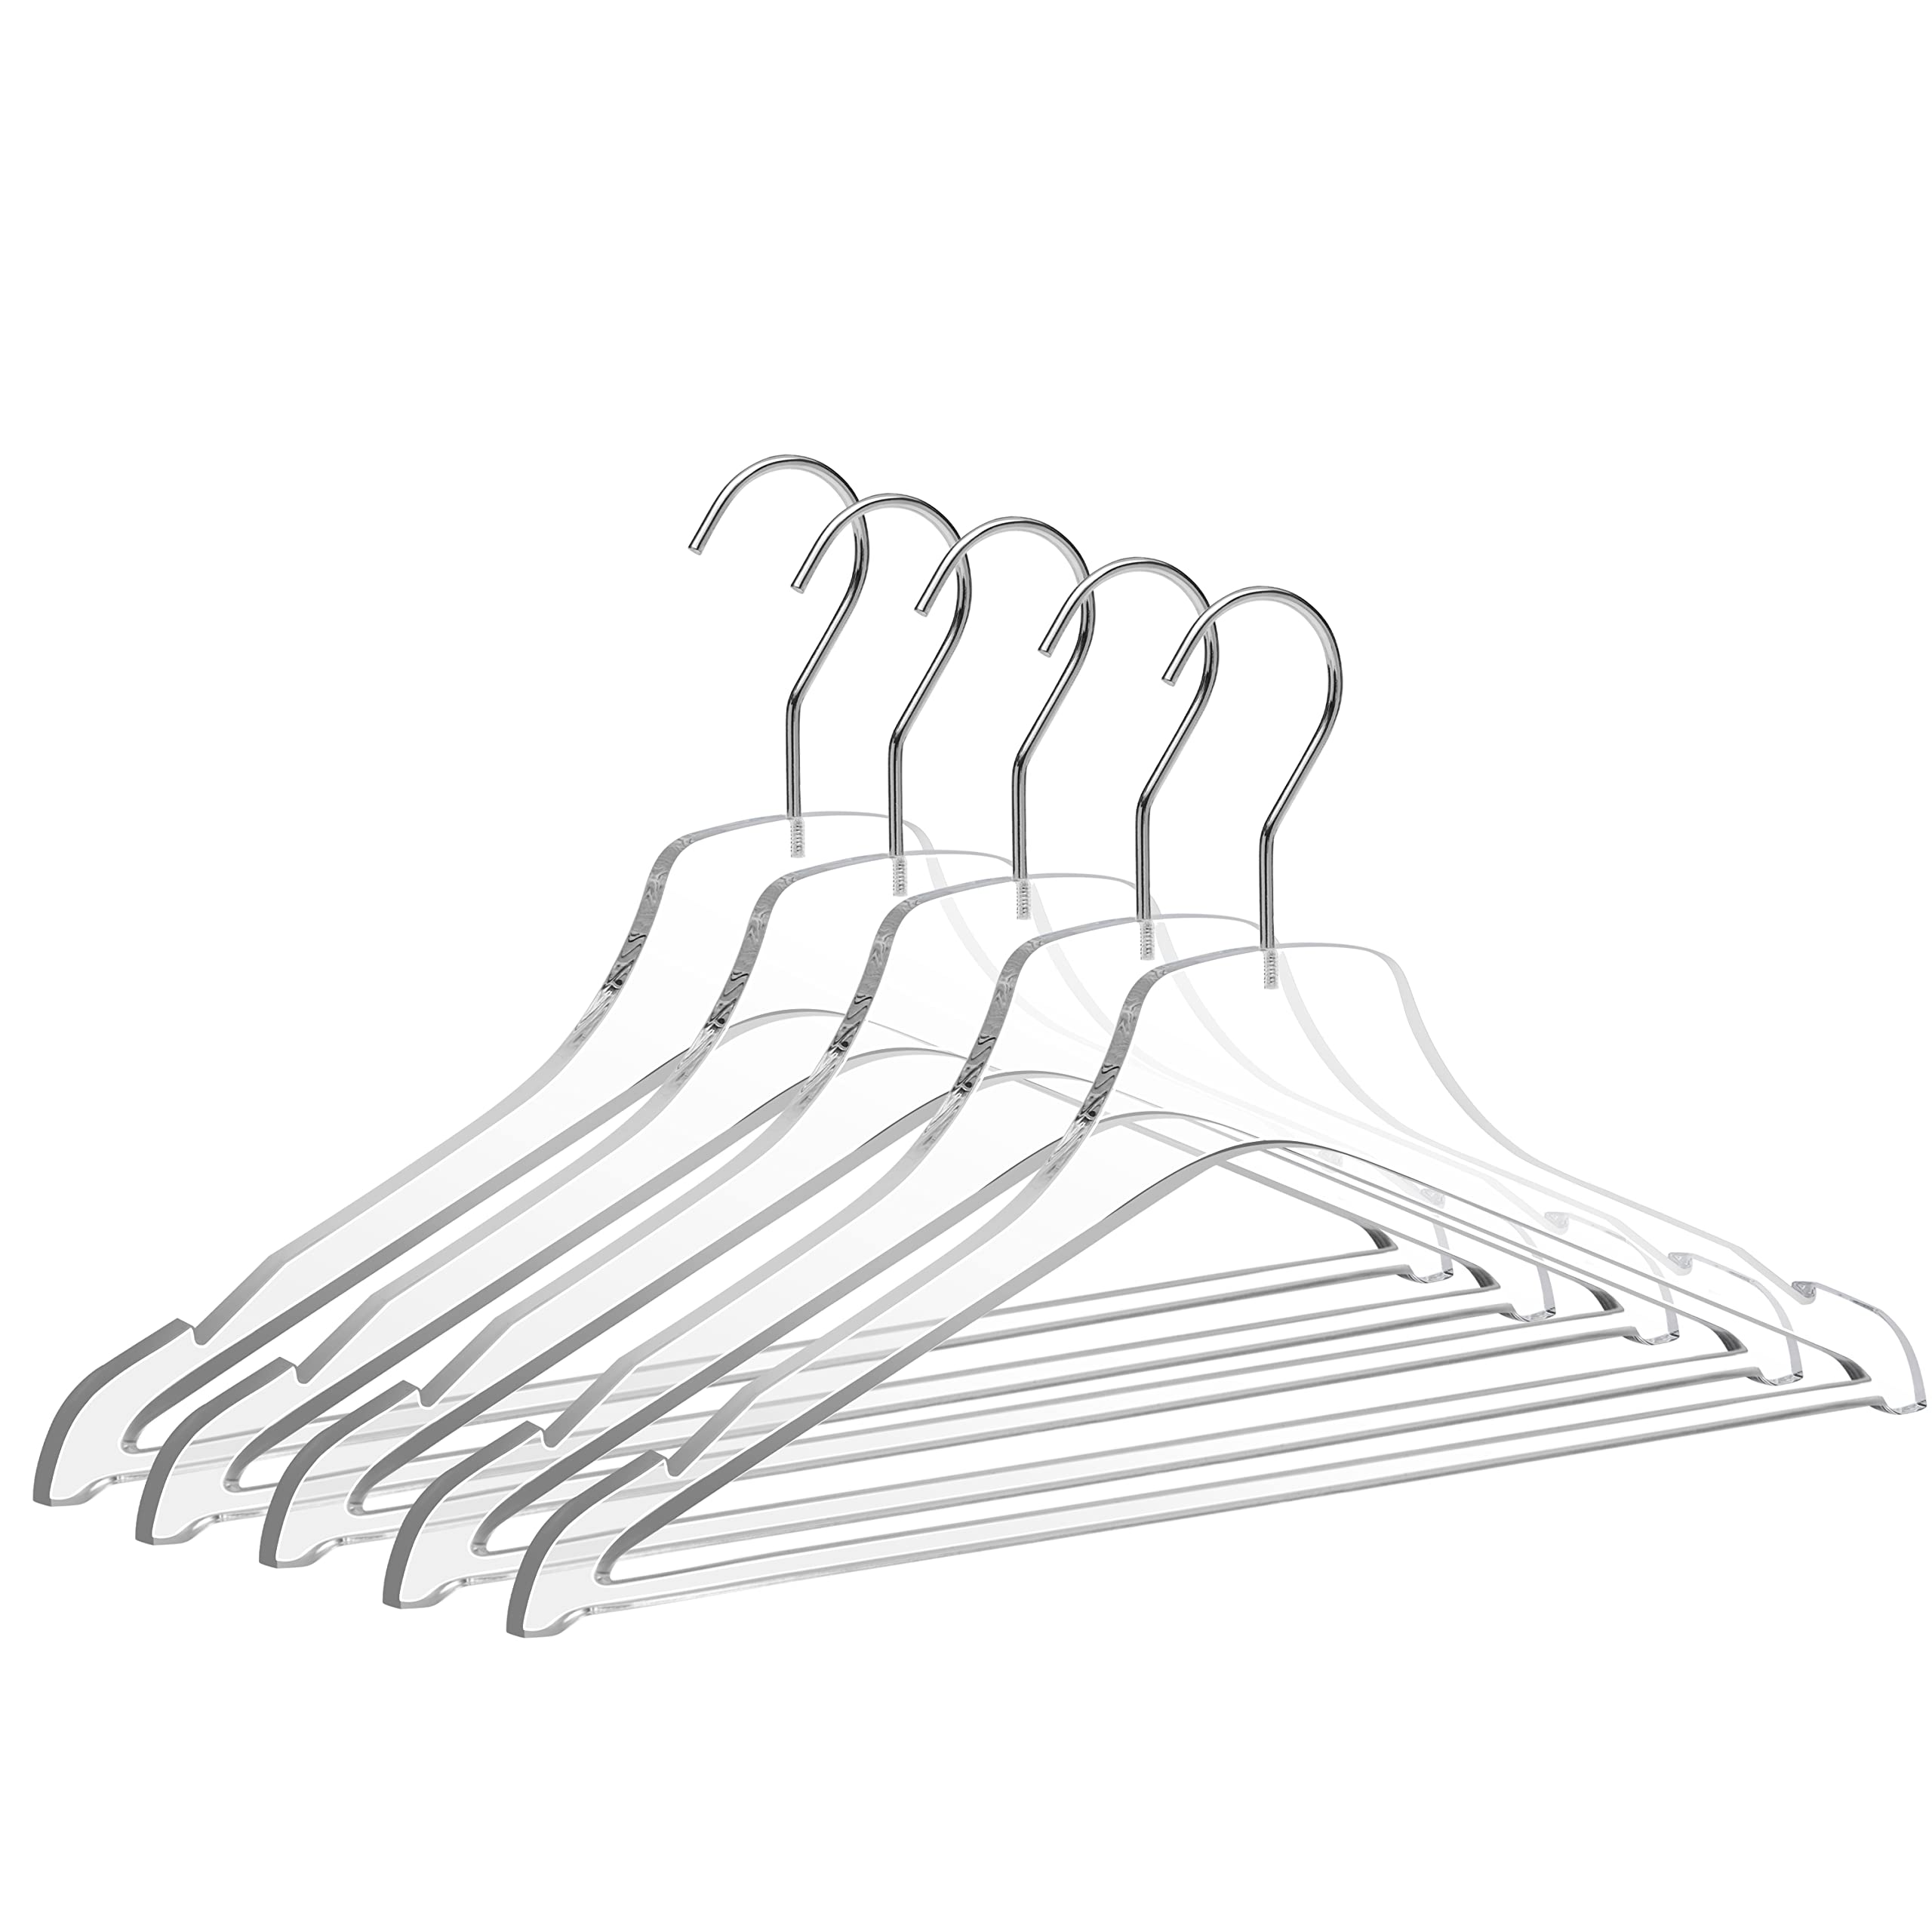 Quality Acrylic Clear Lucite Hangers 5-Pack with Gold Hanging Hooks for Clothes, Pants, Suit Jackets, Coats, and Shirts, Closet and Wardrobe Organization